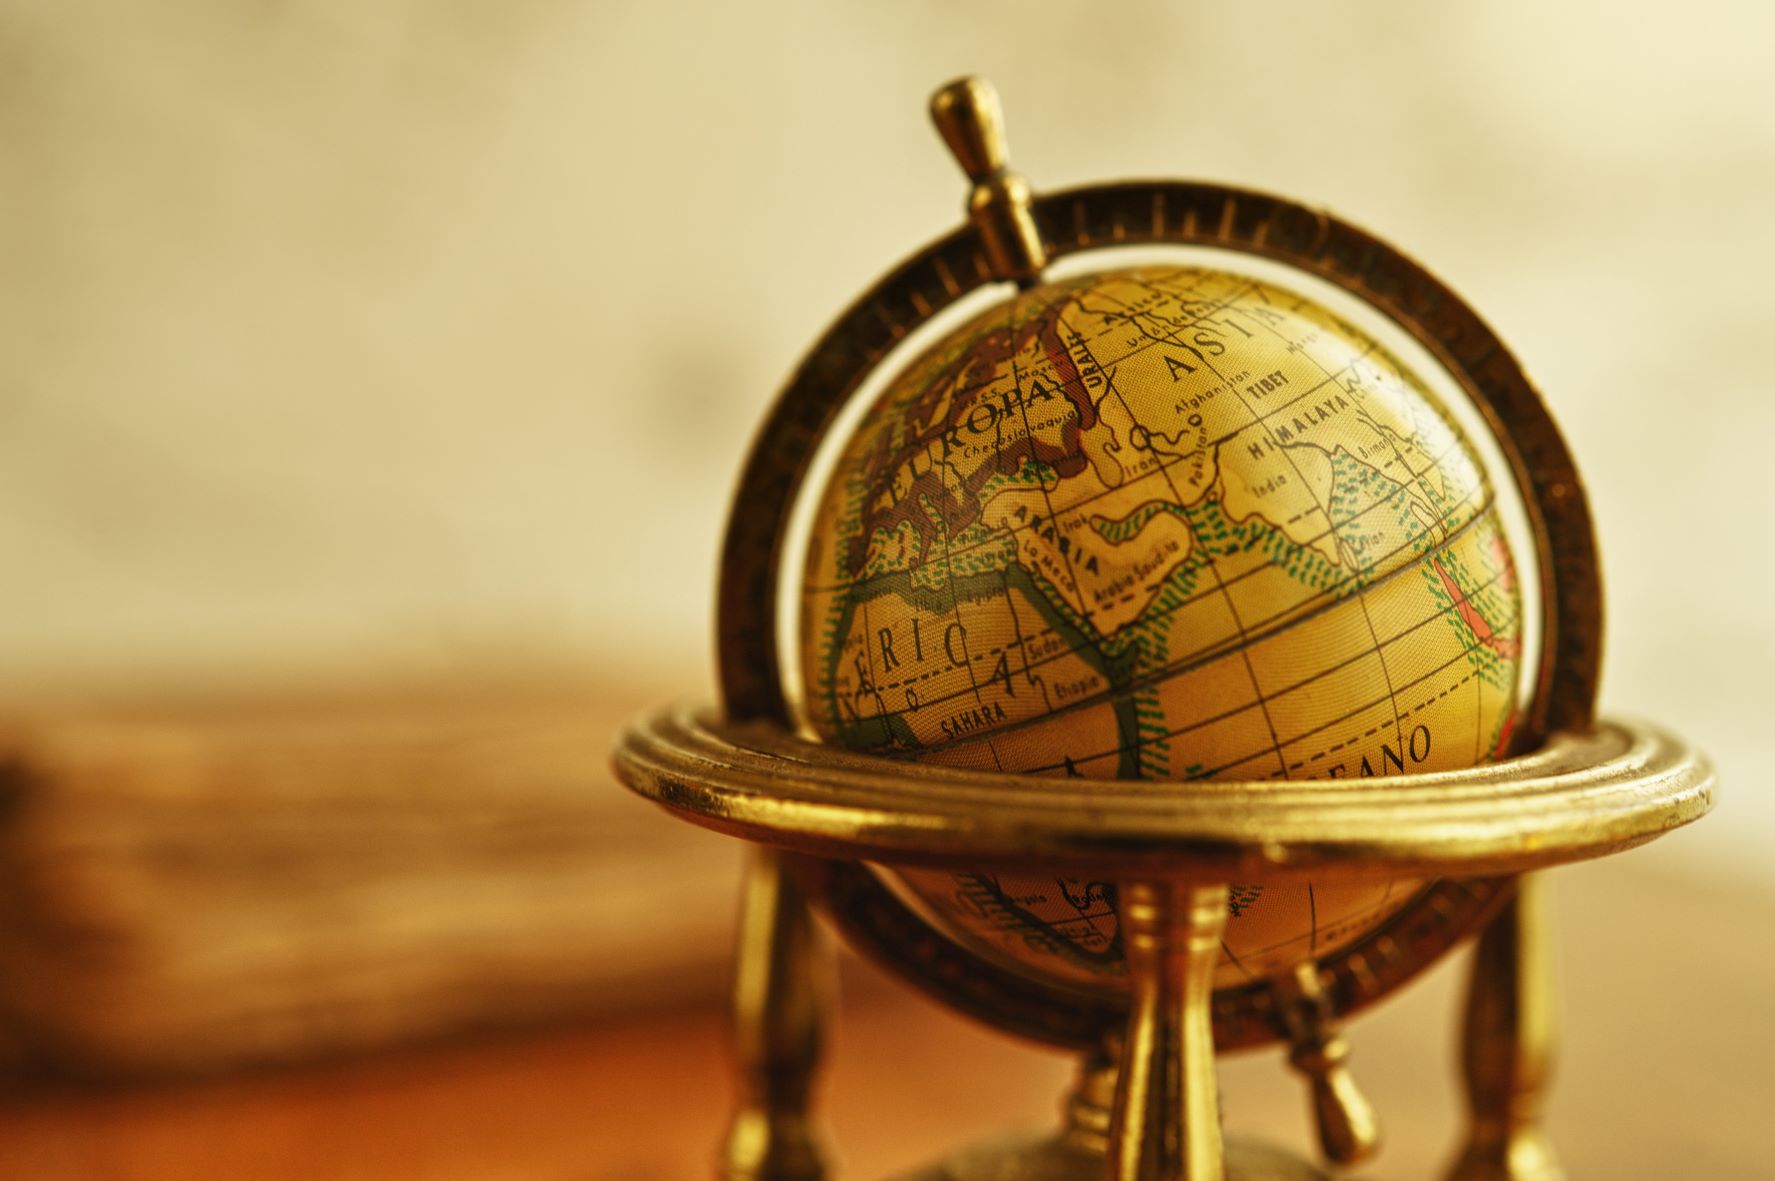 Vintage Globe and Old World Map